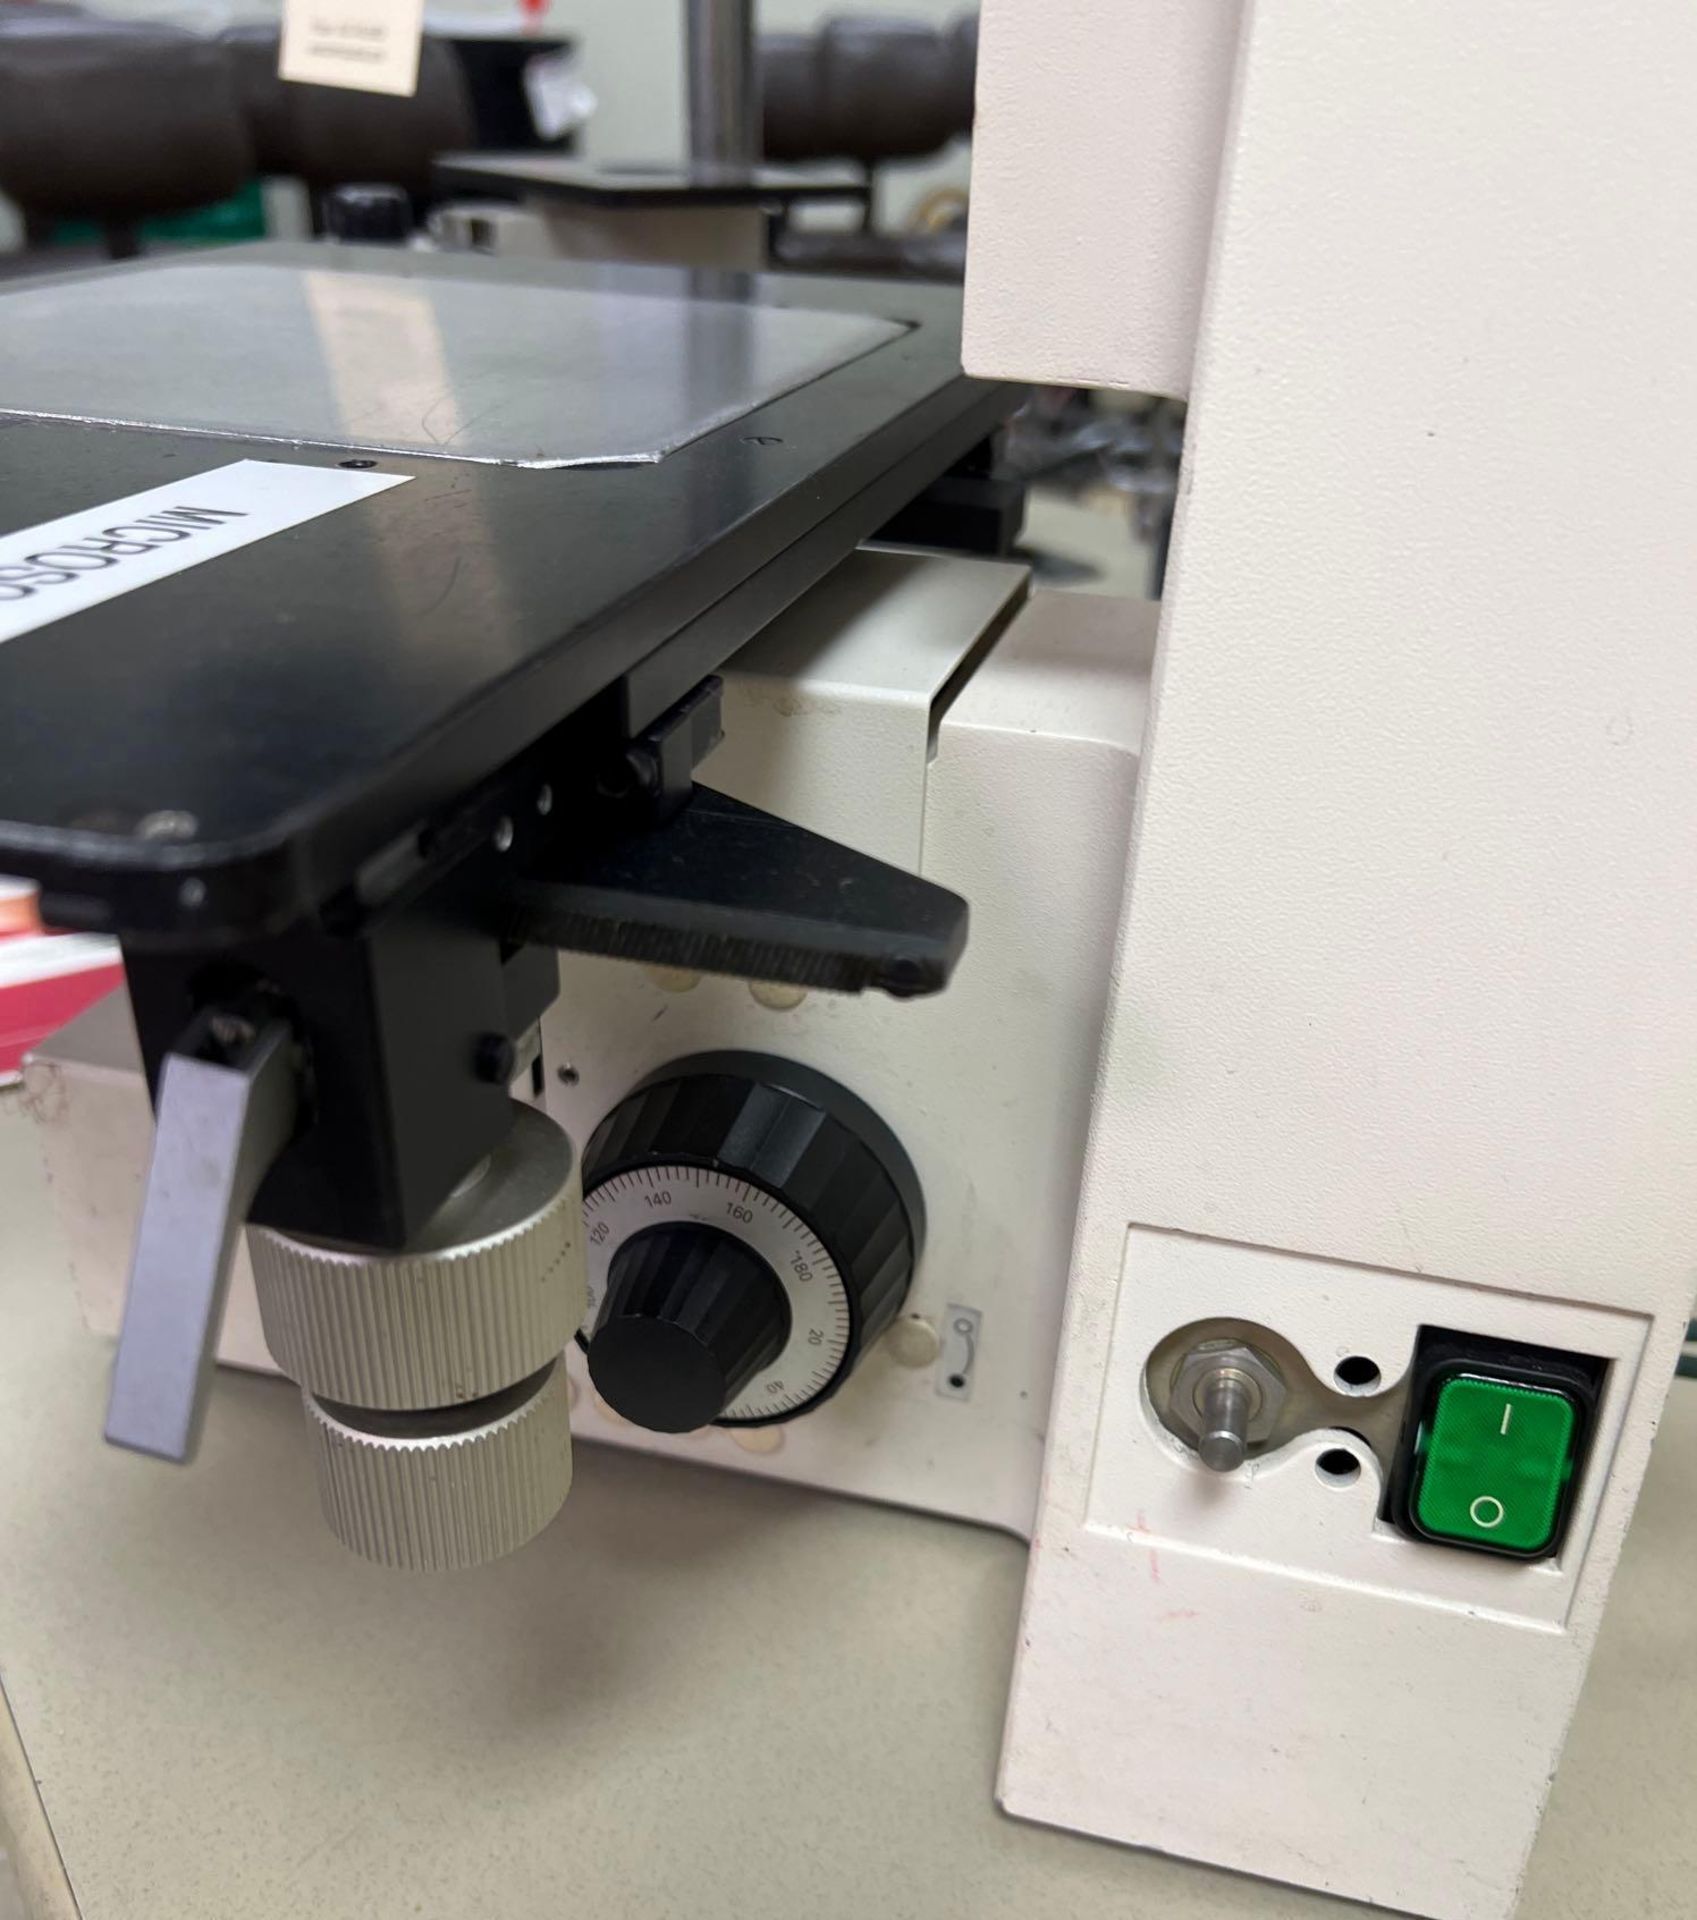 Zeiss Axioscope Light-Section Microscope - Image 4 of 5